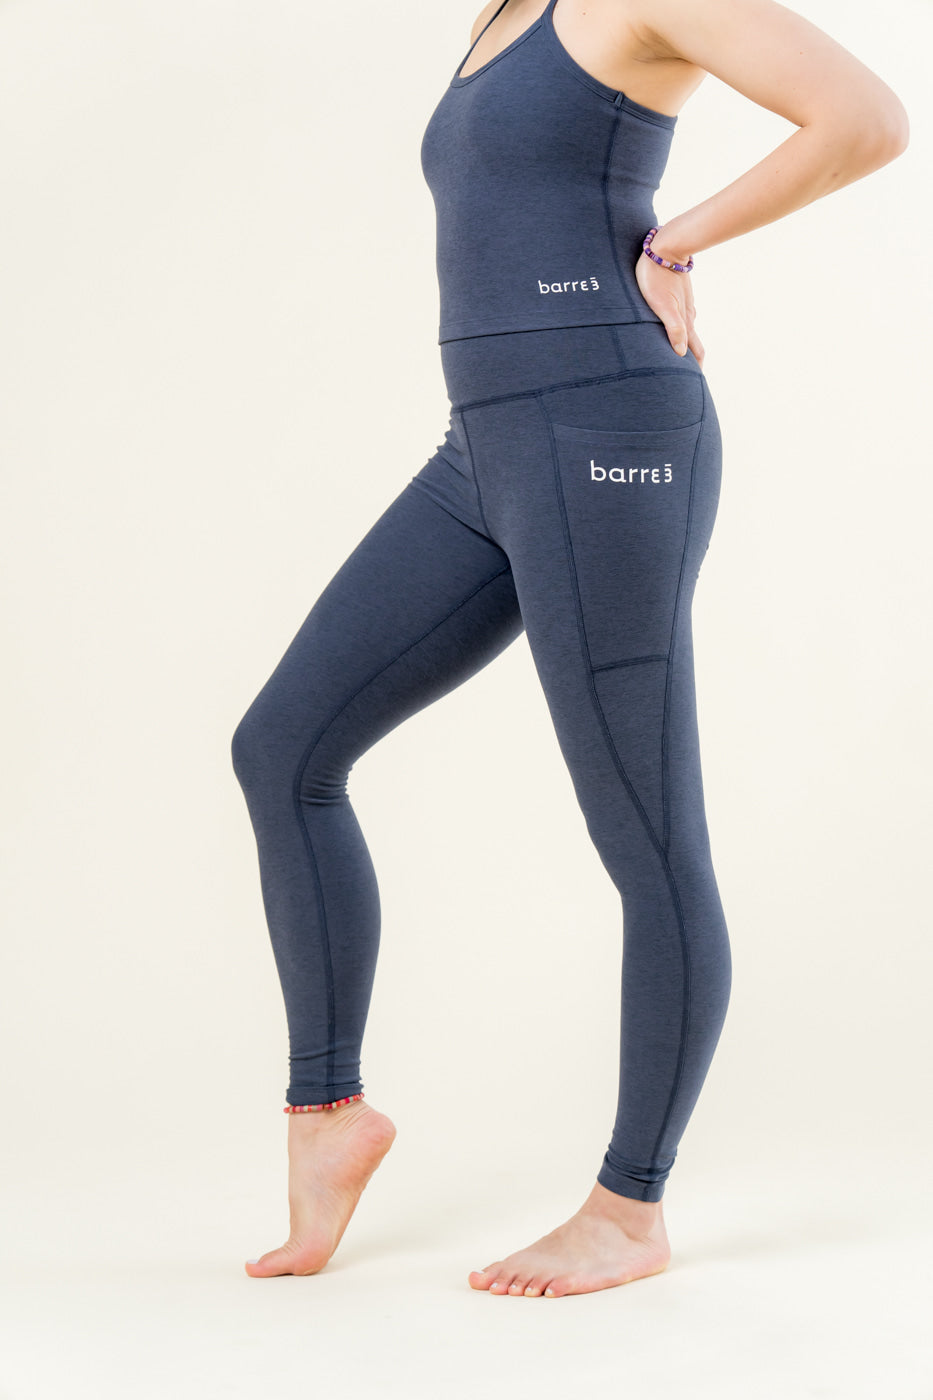 Barre3 and Beyond Yoga Announce Exclusive Active Apparel